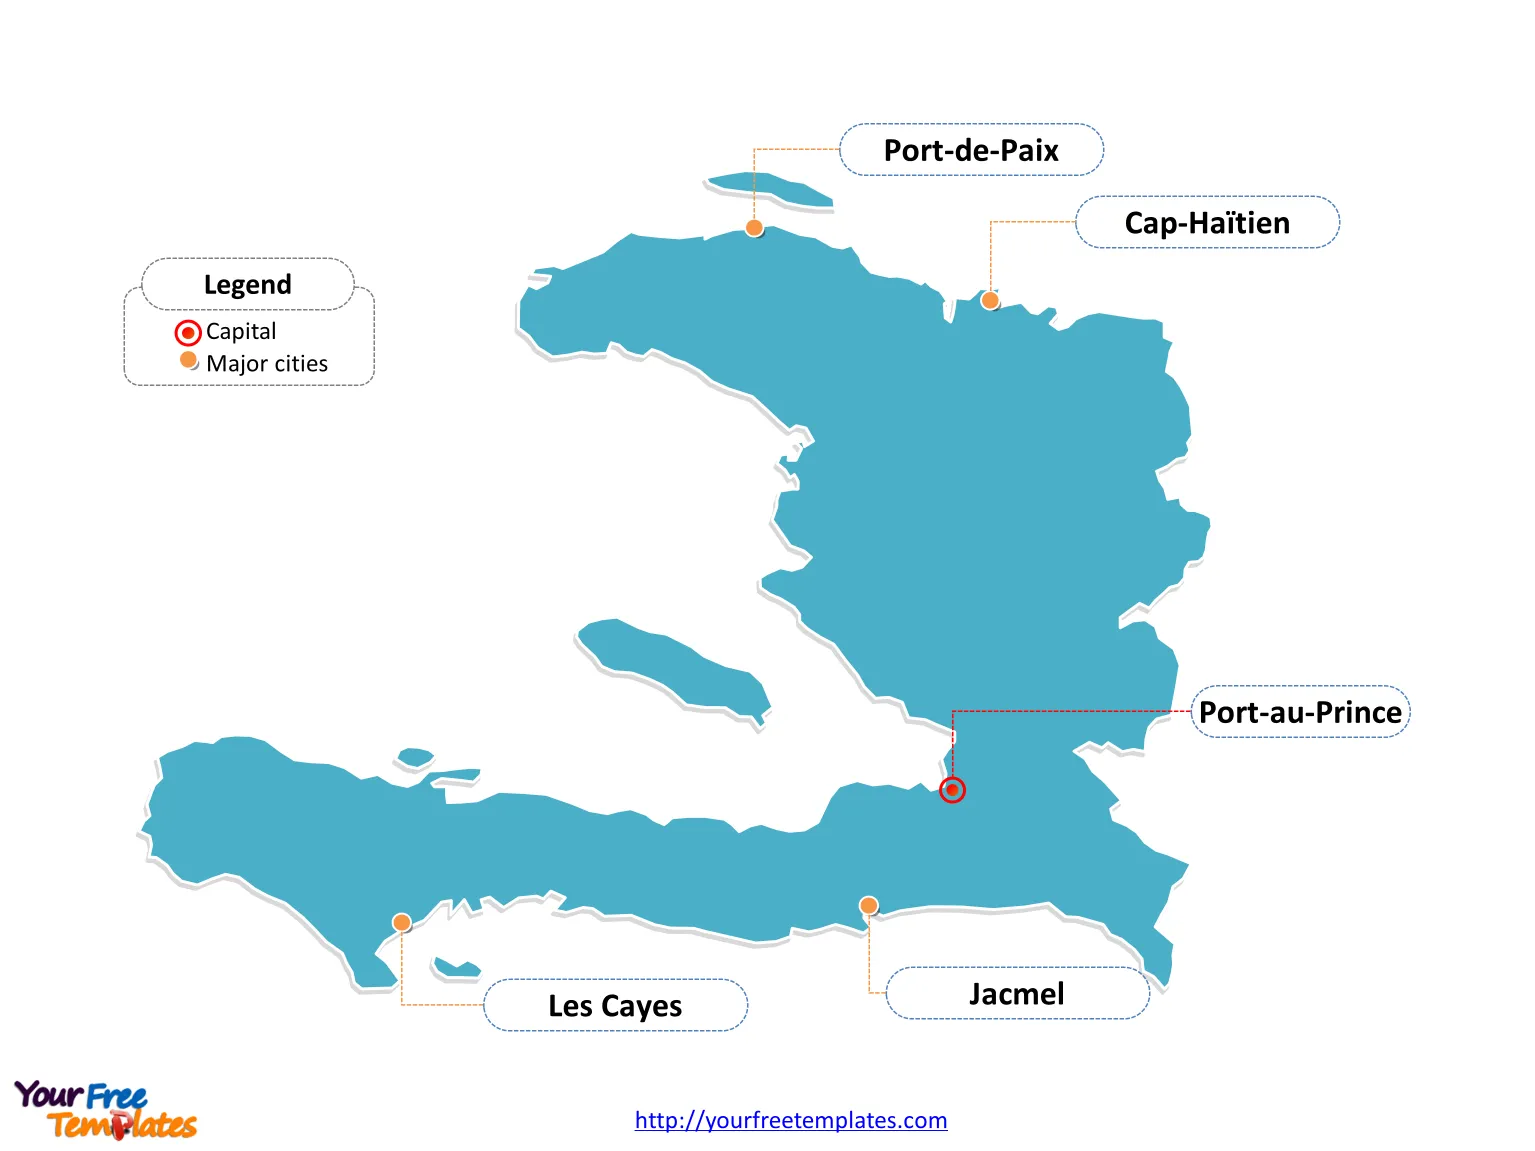 Haiti Outline map labeled with cities